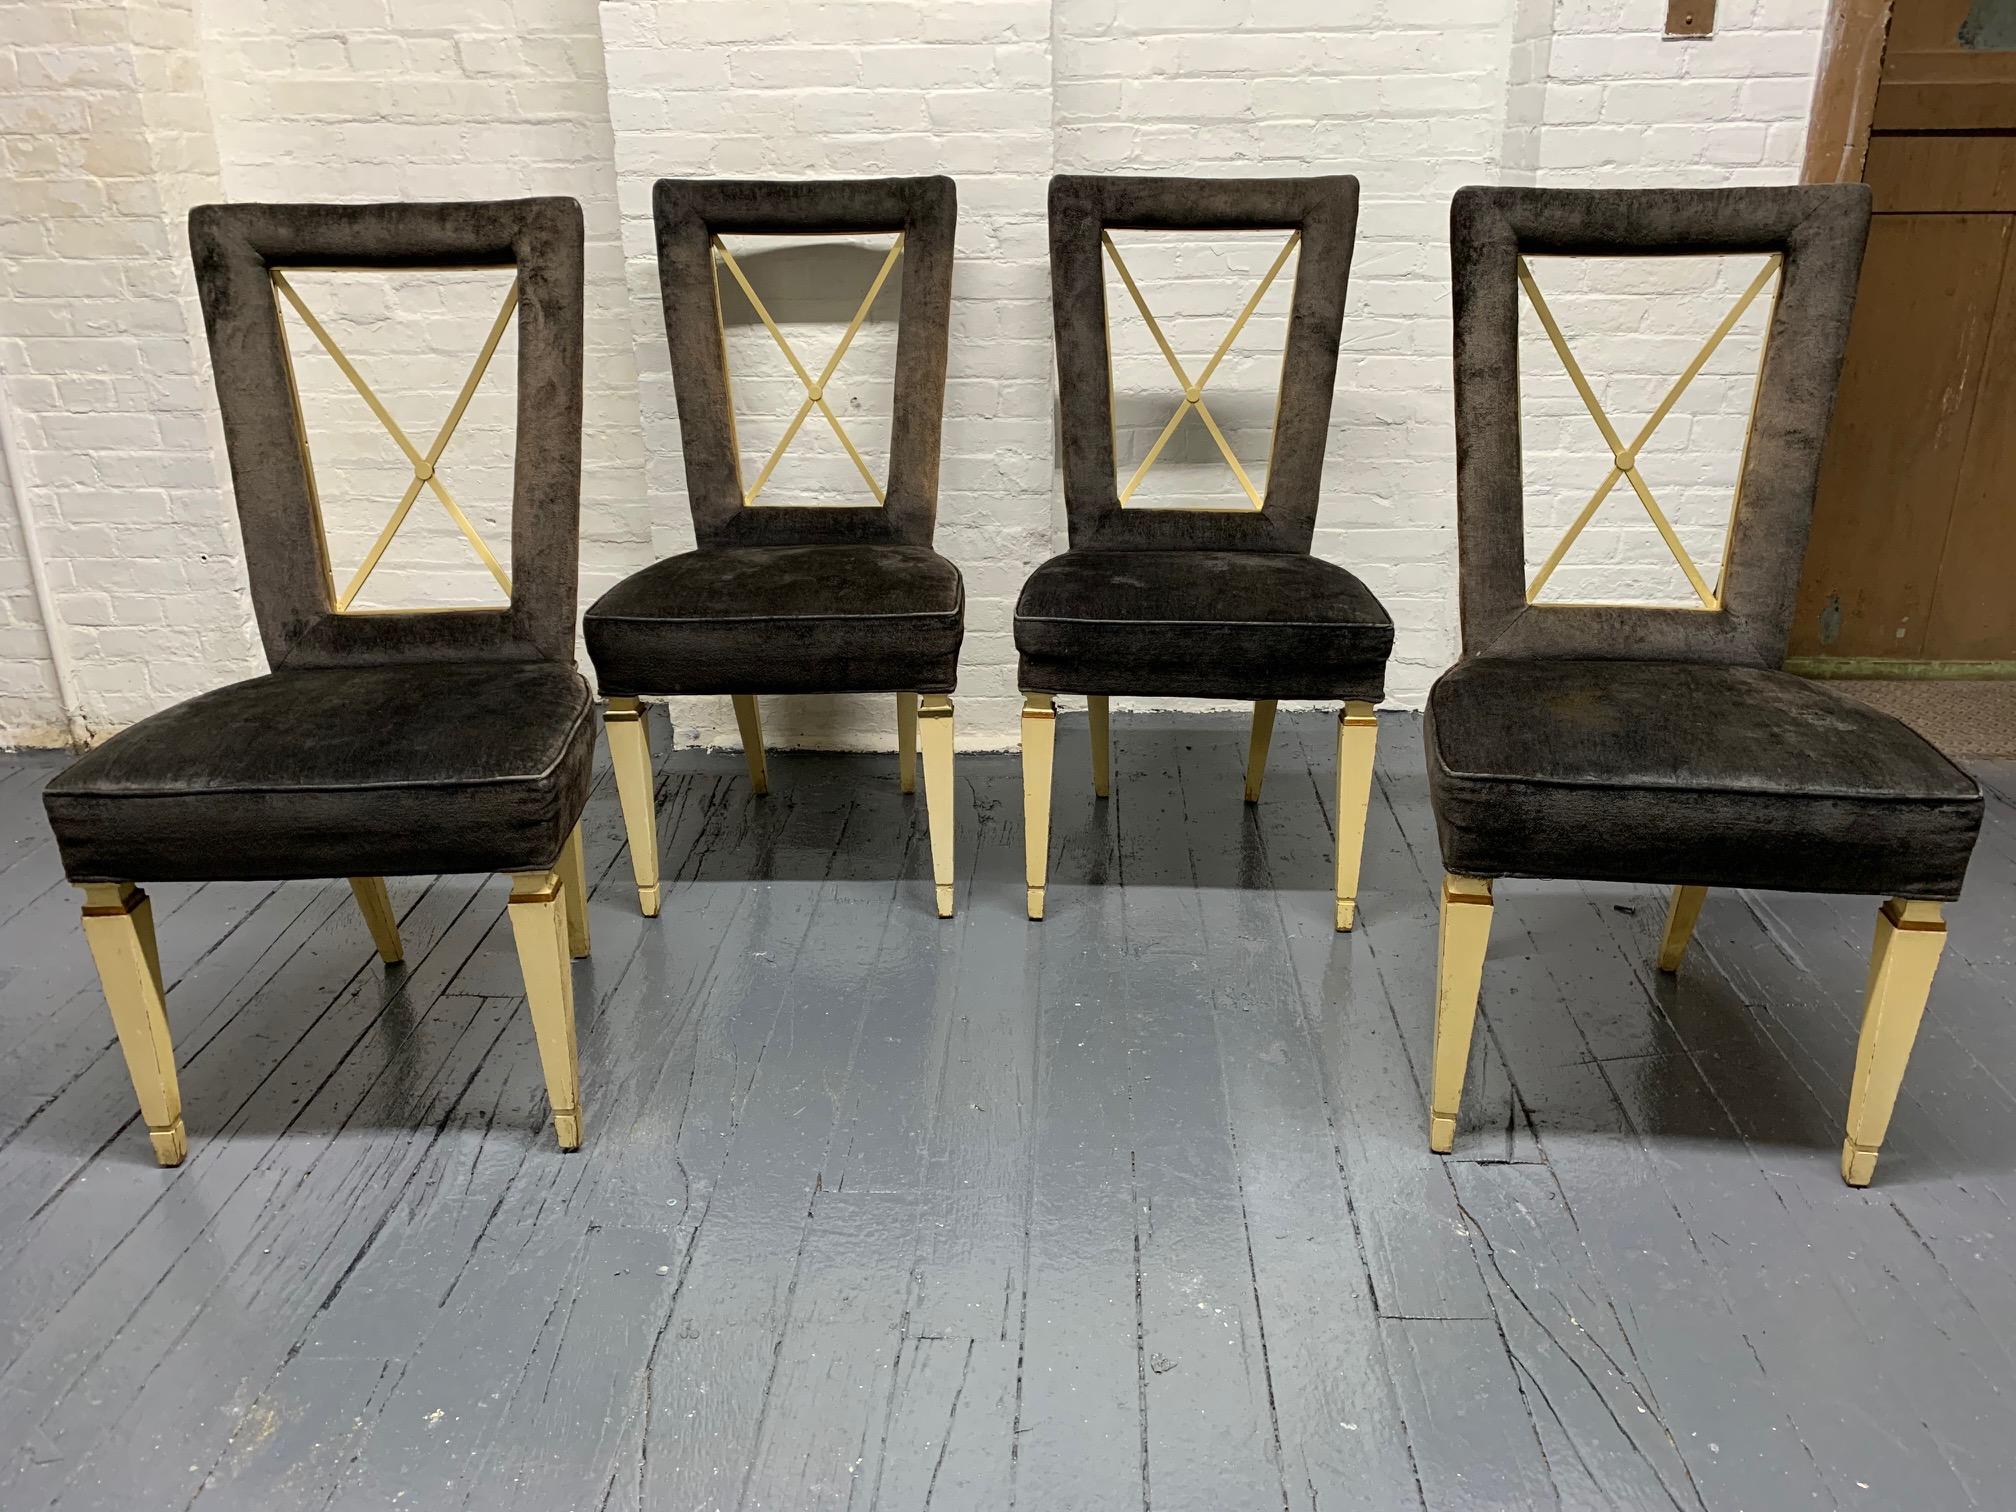 1940s French Directoire dining chairs. These chairs have open backs supported by bronze 